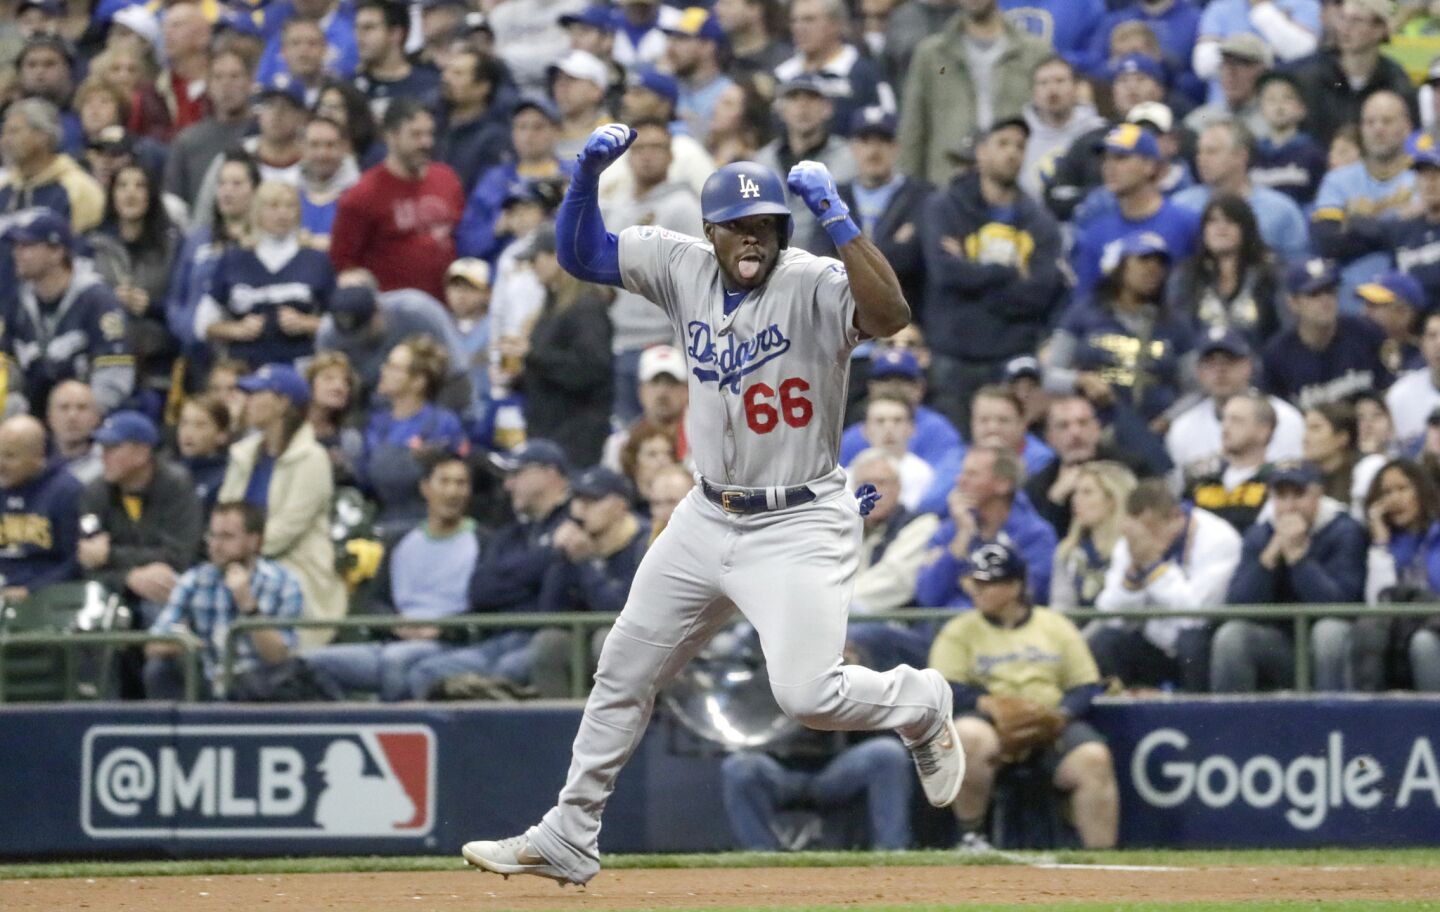 Dodgers Yasiel Puig celebrates after hitting a three run homer in the sixth inning.